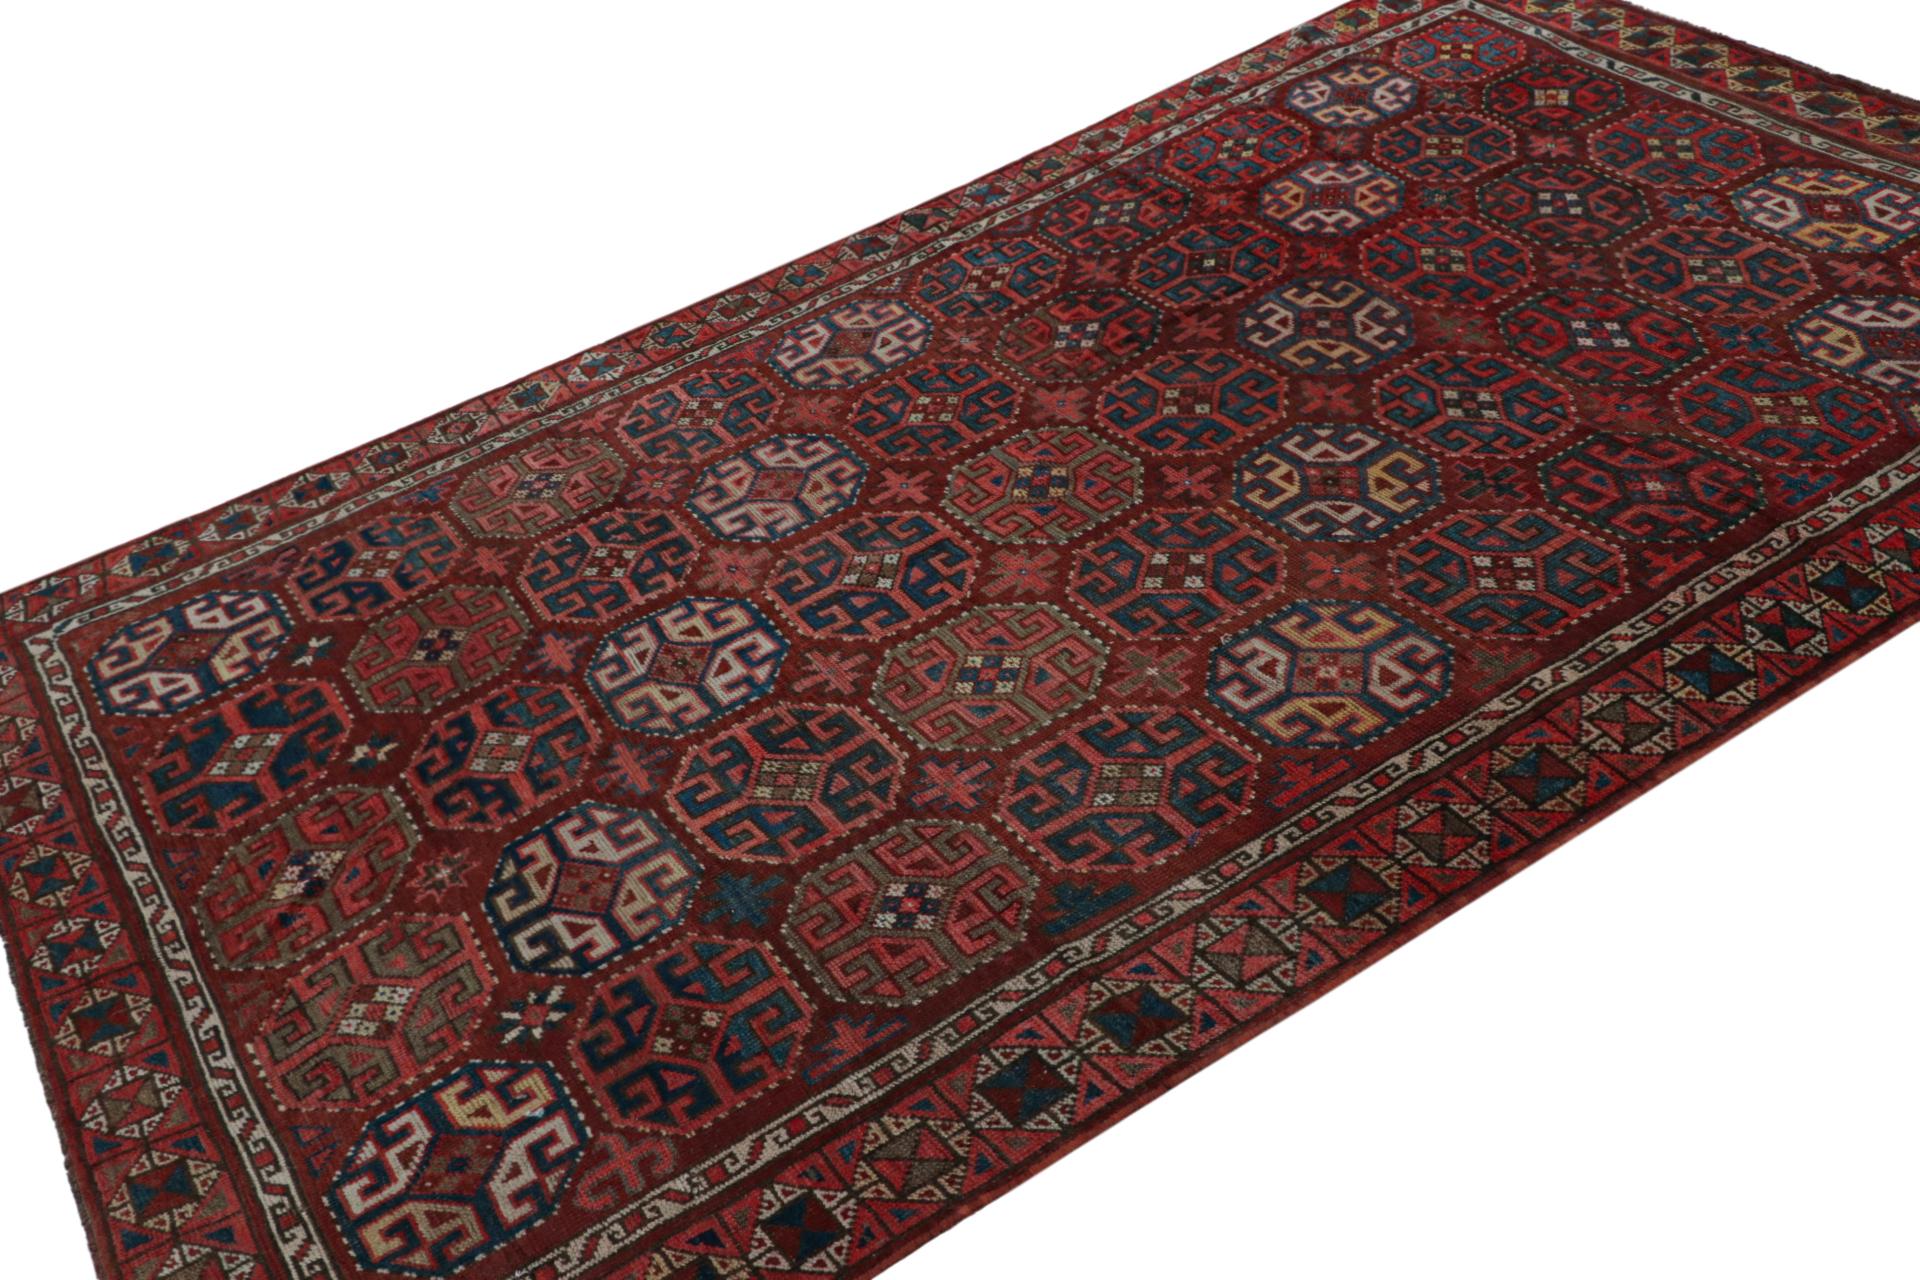 Hand Knotted in wool, this vintage 6x9 Turkish rug, features traditional designs with an inspiration from Khotan Samarkand rugs and similar provenances 

On the Design: 

Connoisseurs will admire this design that features traditional design with an